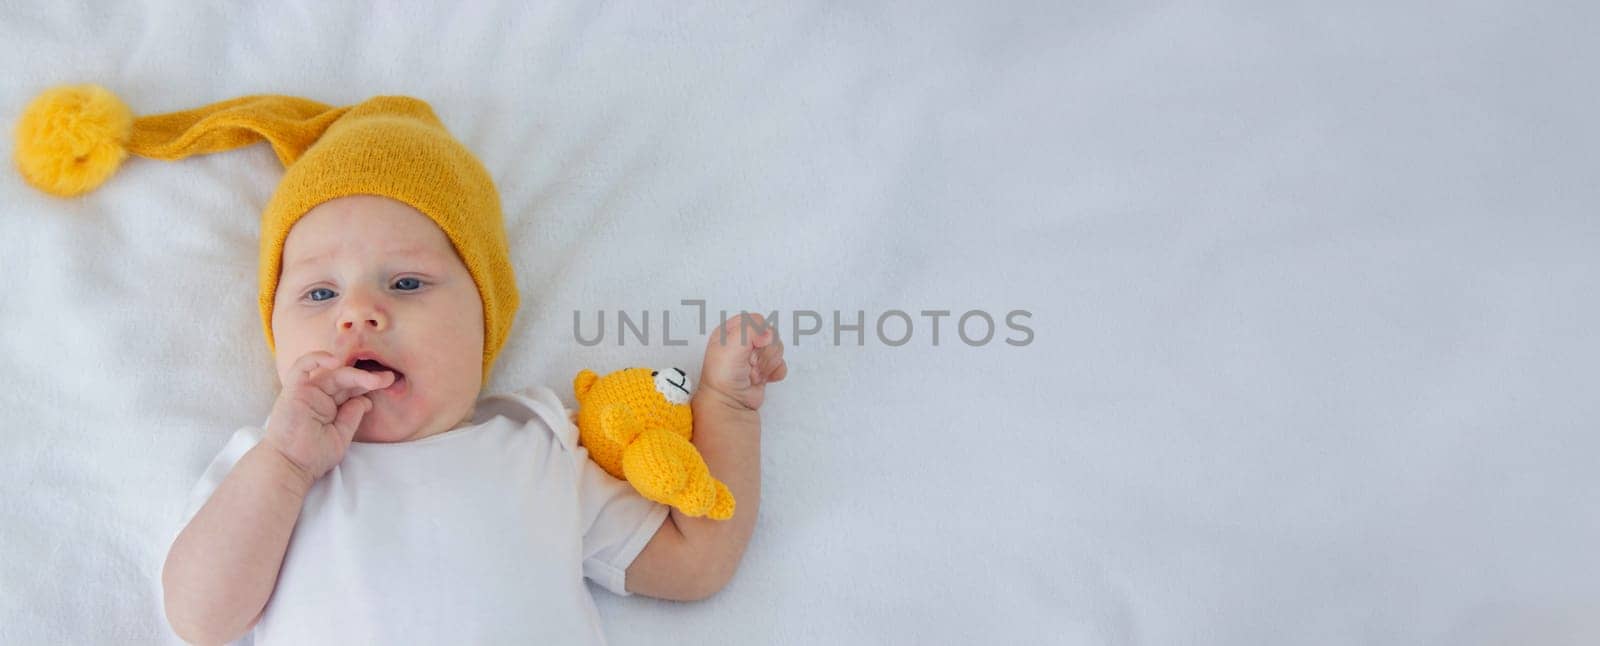 the child lies on a white background with a small bear.